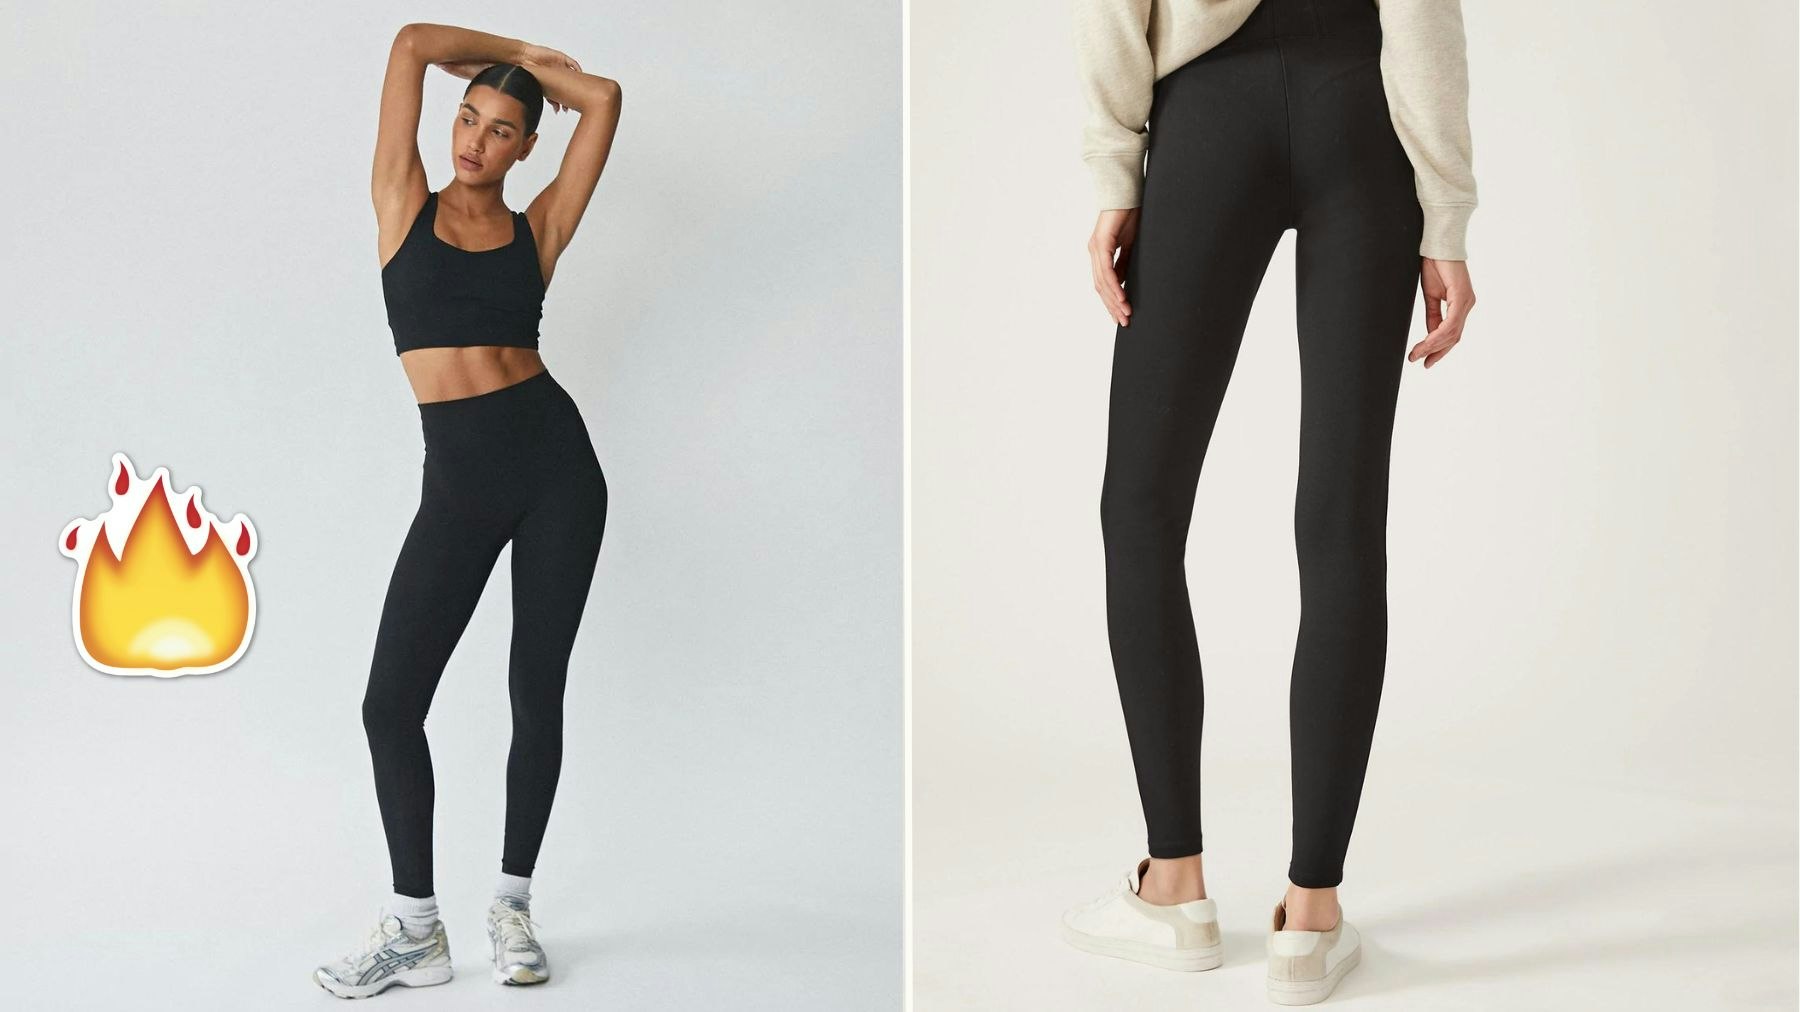 Shoppers amazed at Asda £12 leggings that give everyone perfect